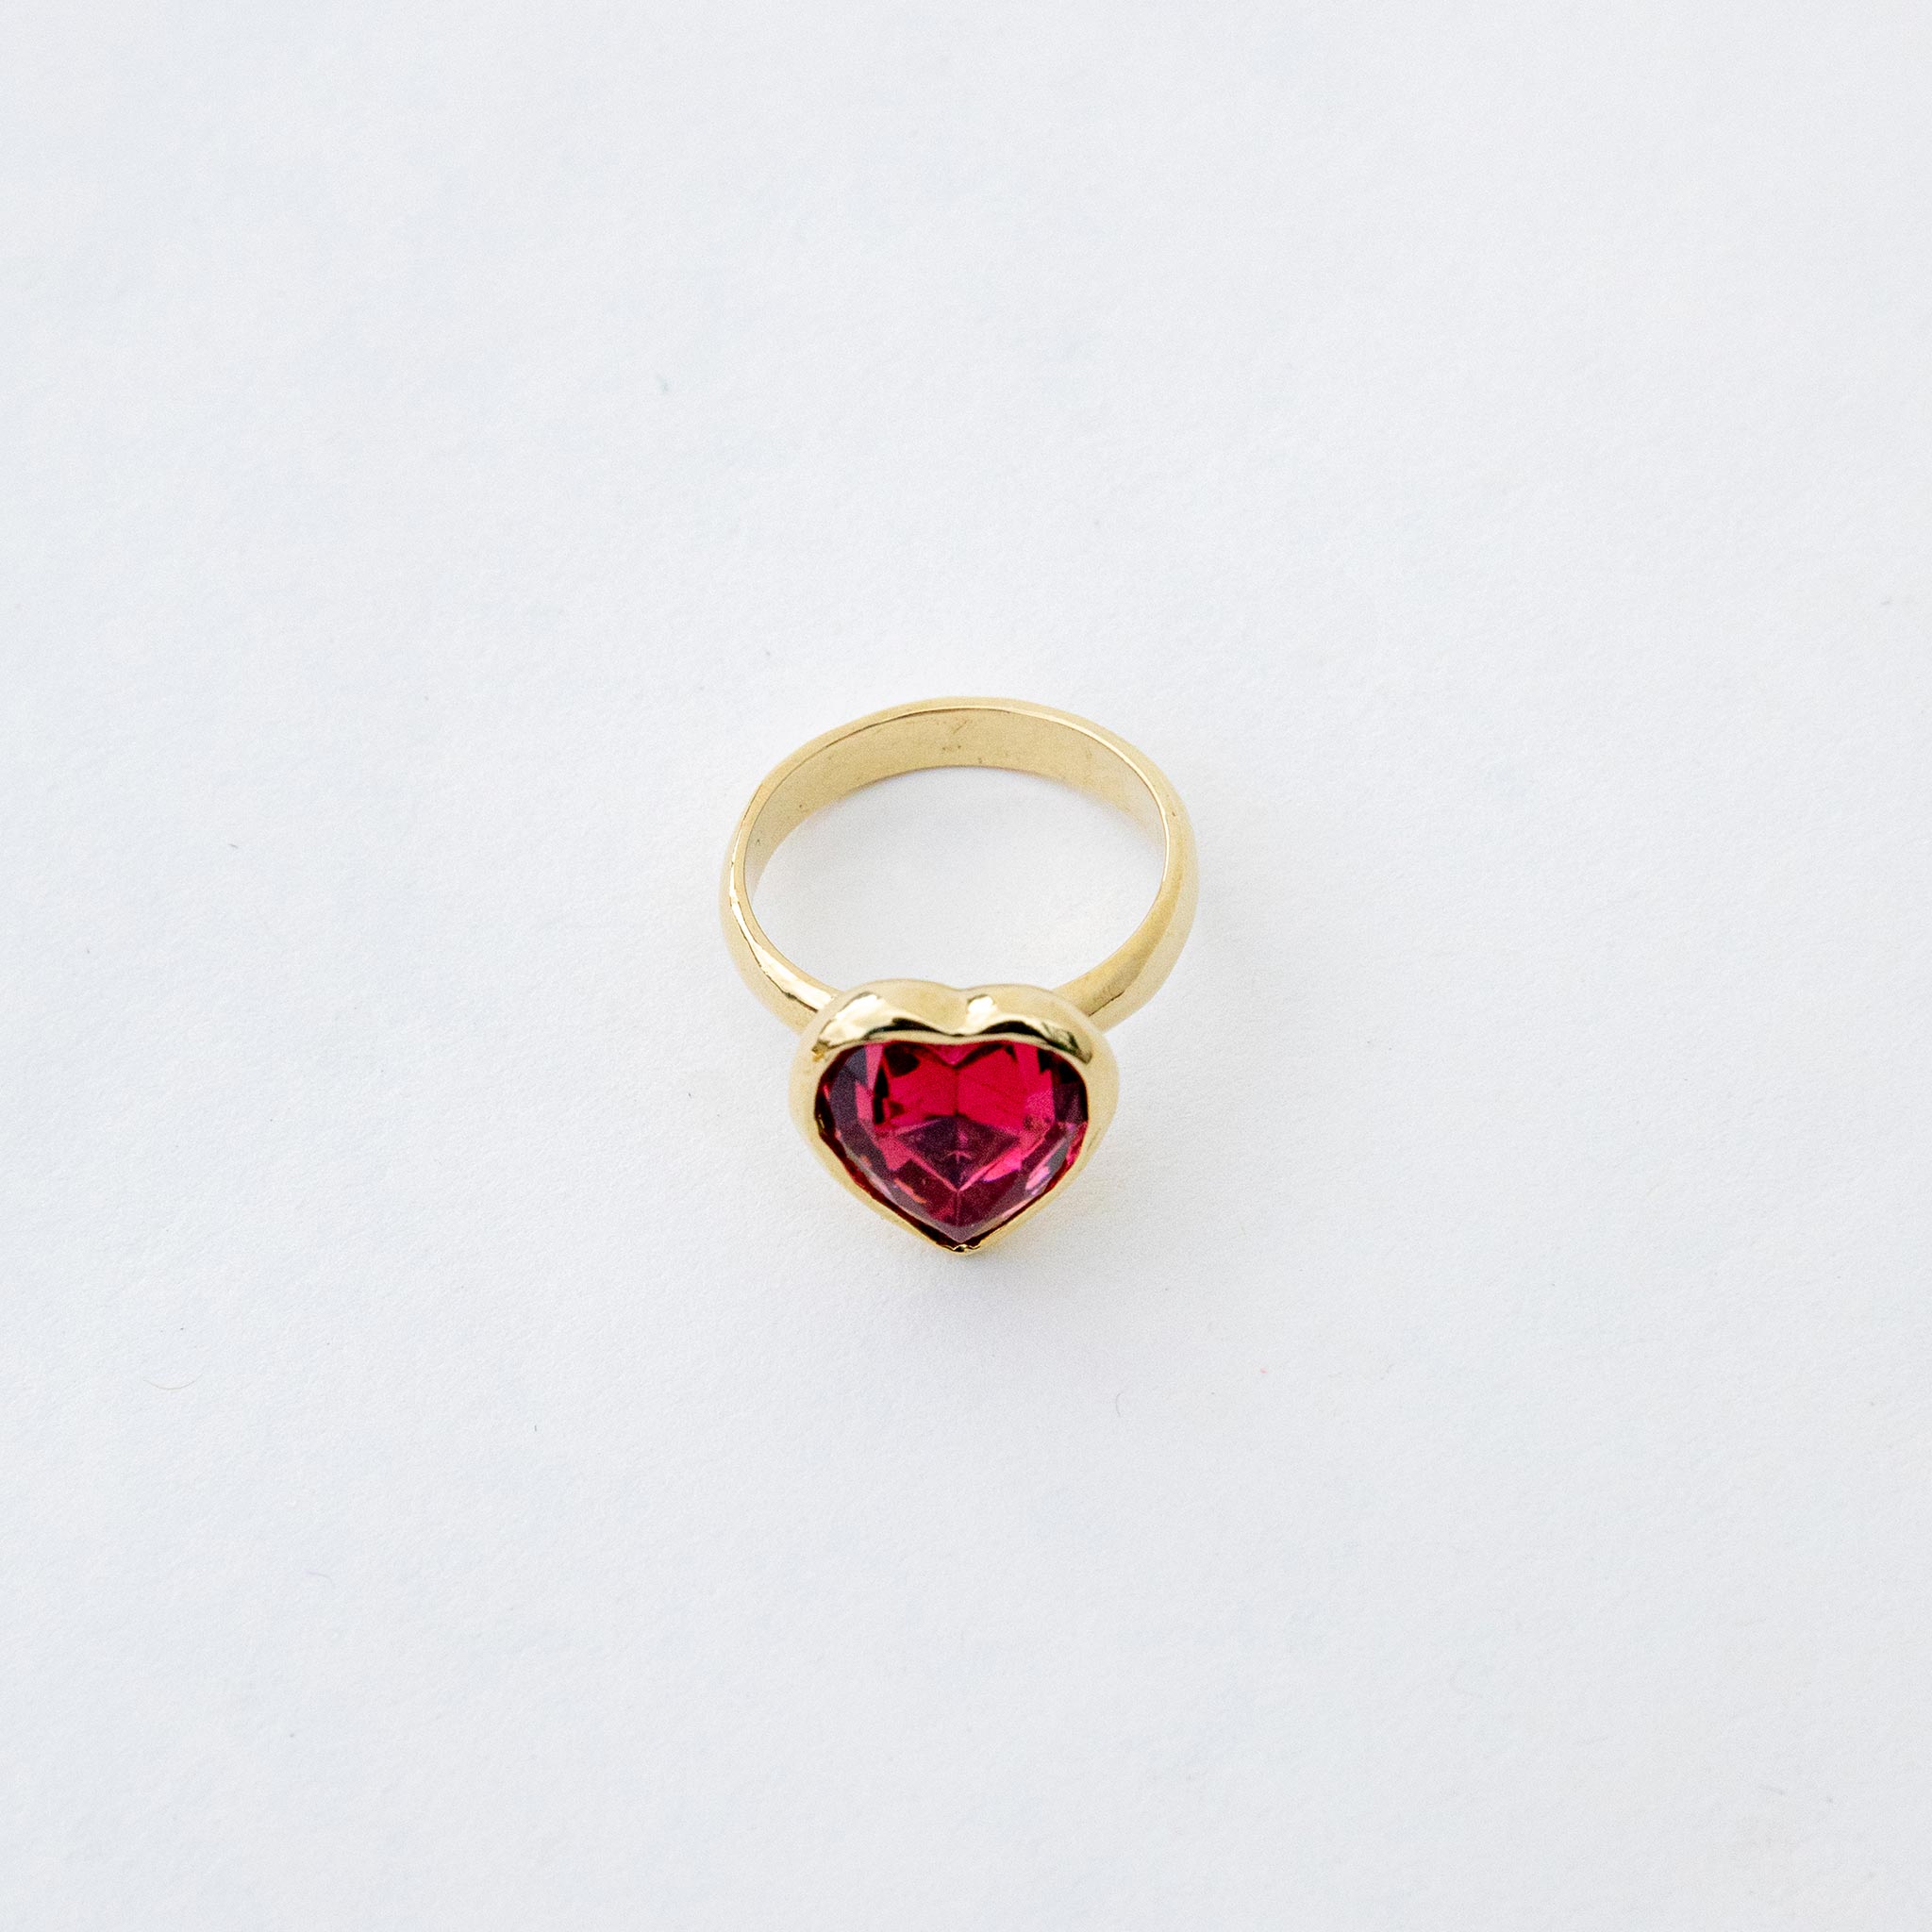 Close detail photo of the lovely ring on a white background.